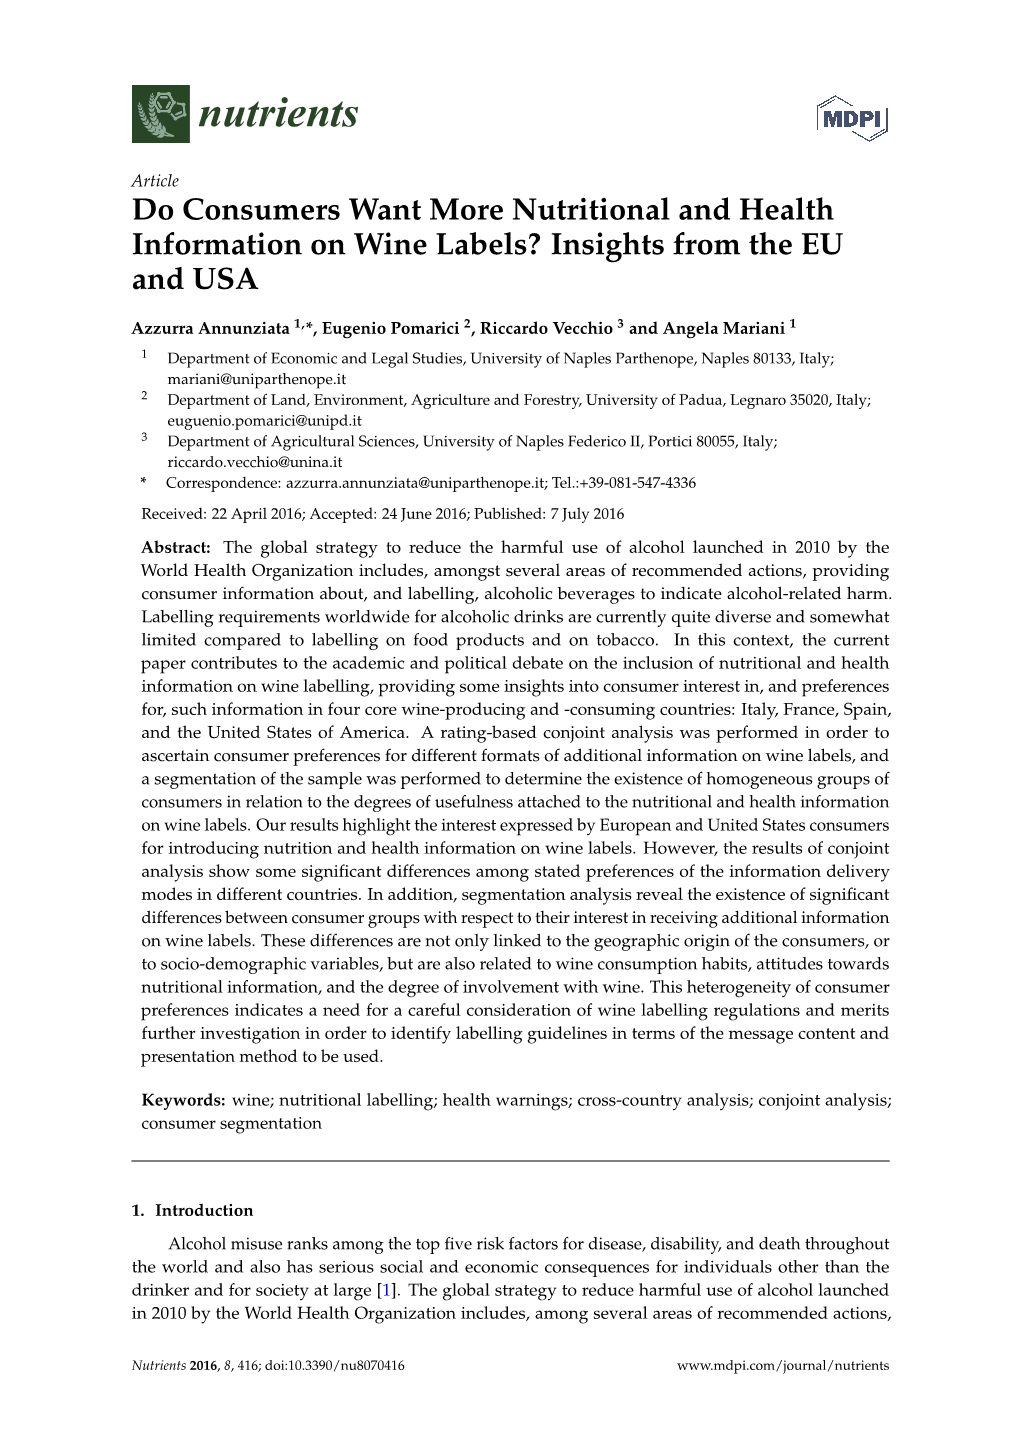 Do Consumers Want More Nutritional and Health Information on Wine Labels? Insights from the EU and USA